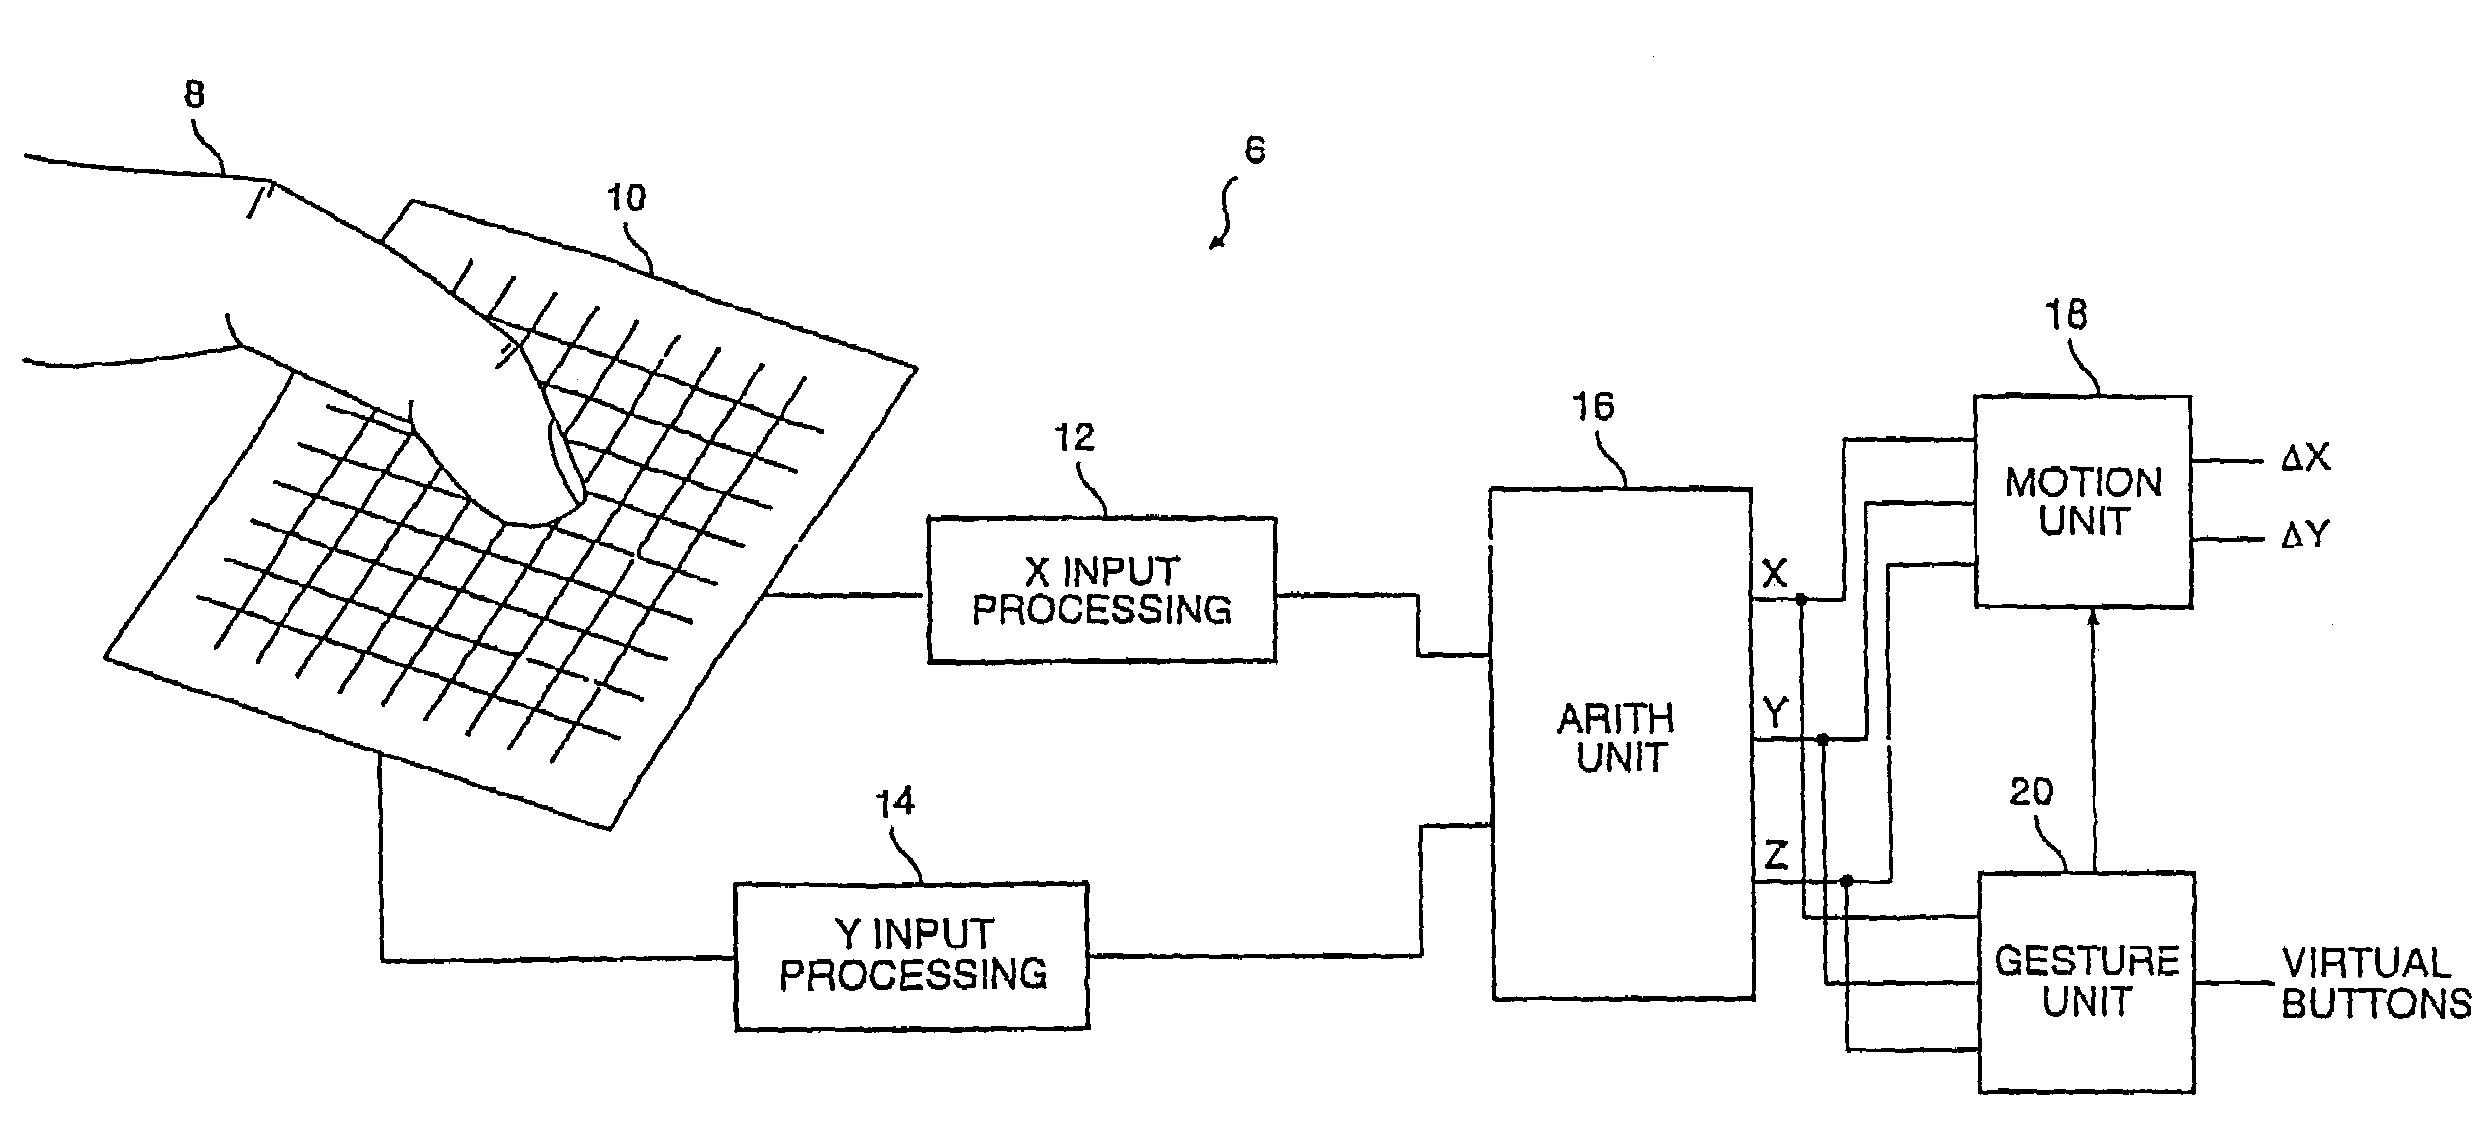 Object position detector with edge motion feature and gesture recognition